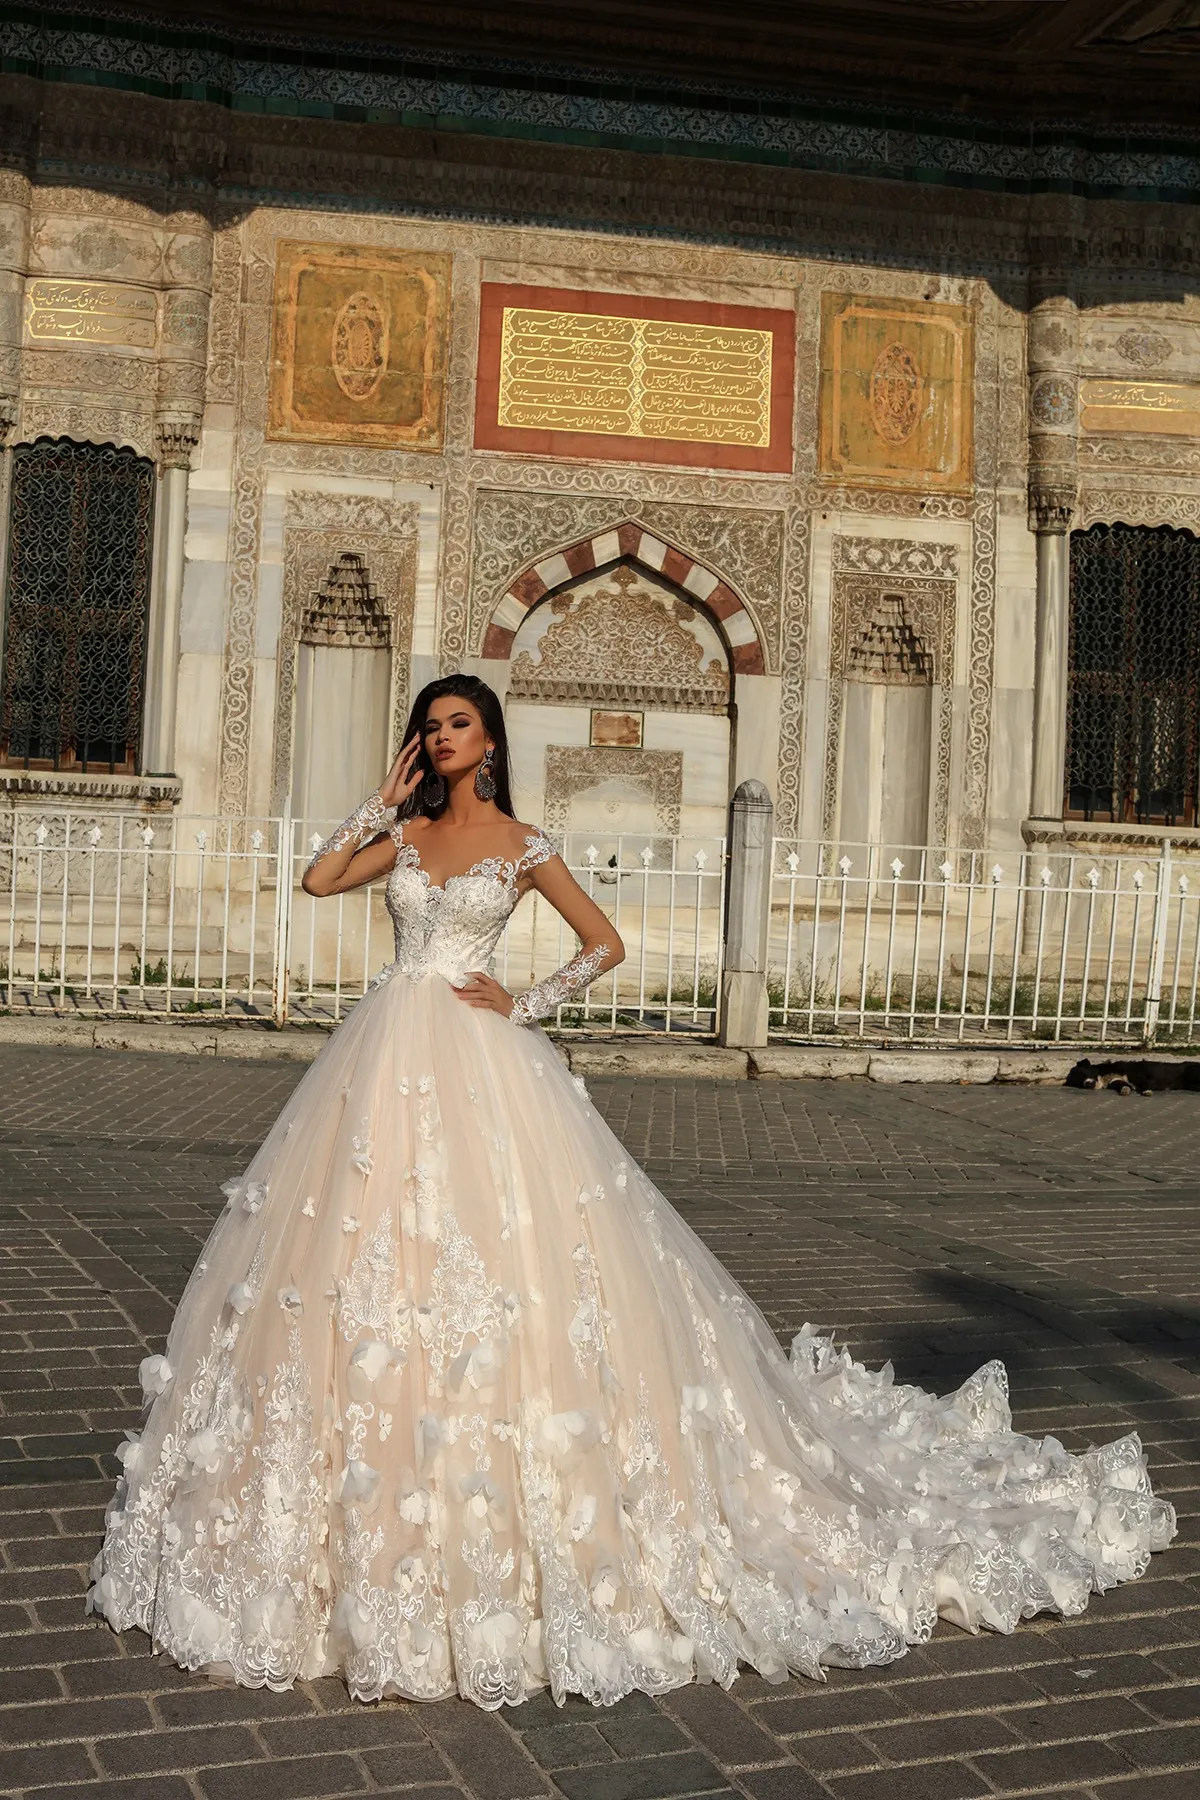 2020 Gorgeous Designer Champagne Wedding Dresses with White 3D Flowers Illusion Sheer Long Sleeves Court Train Arabic Bridal Gowns